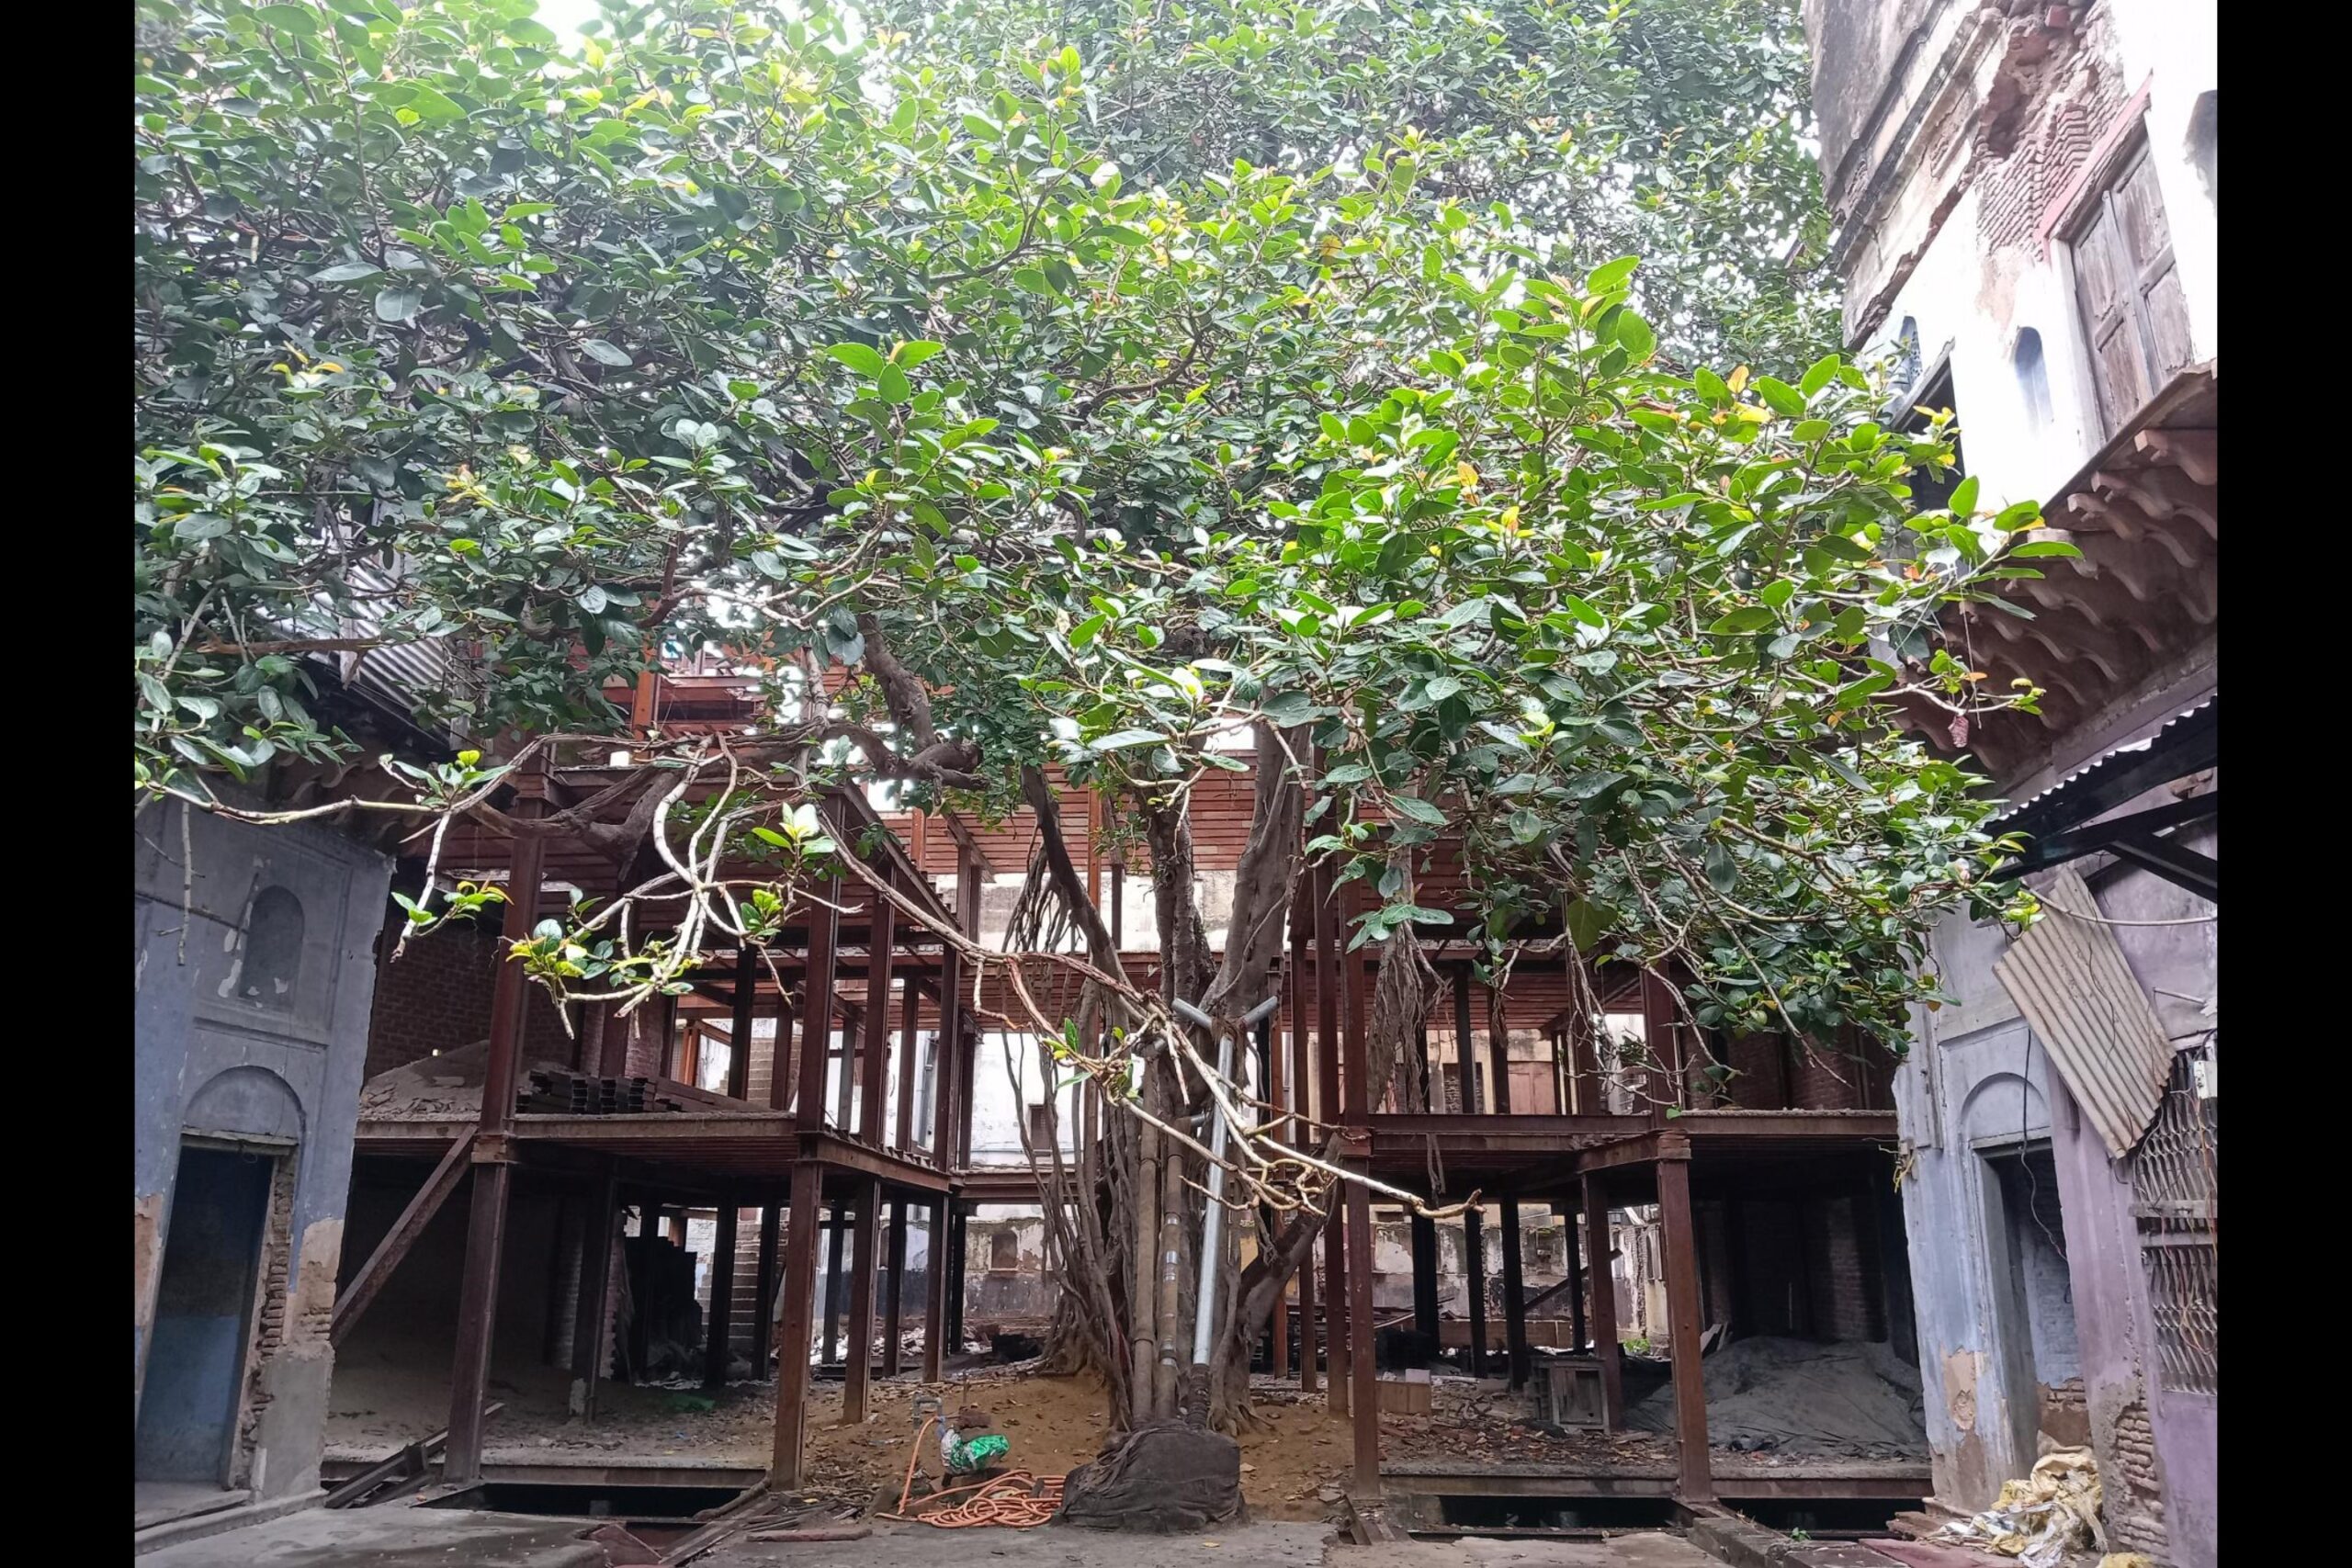 Withering heights: A 300-year-old banyan tree faces the axe